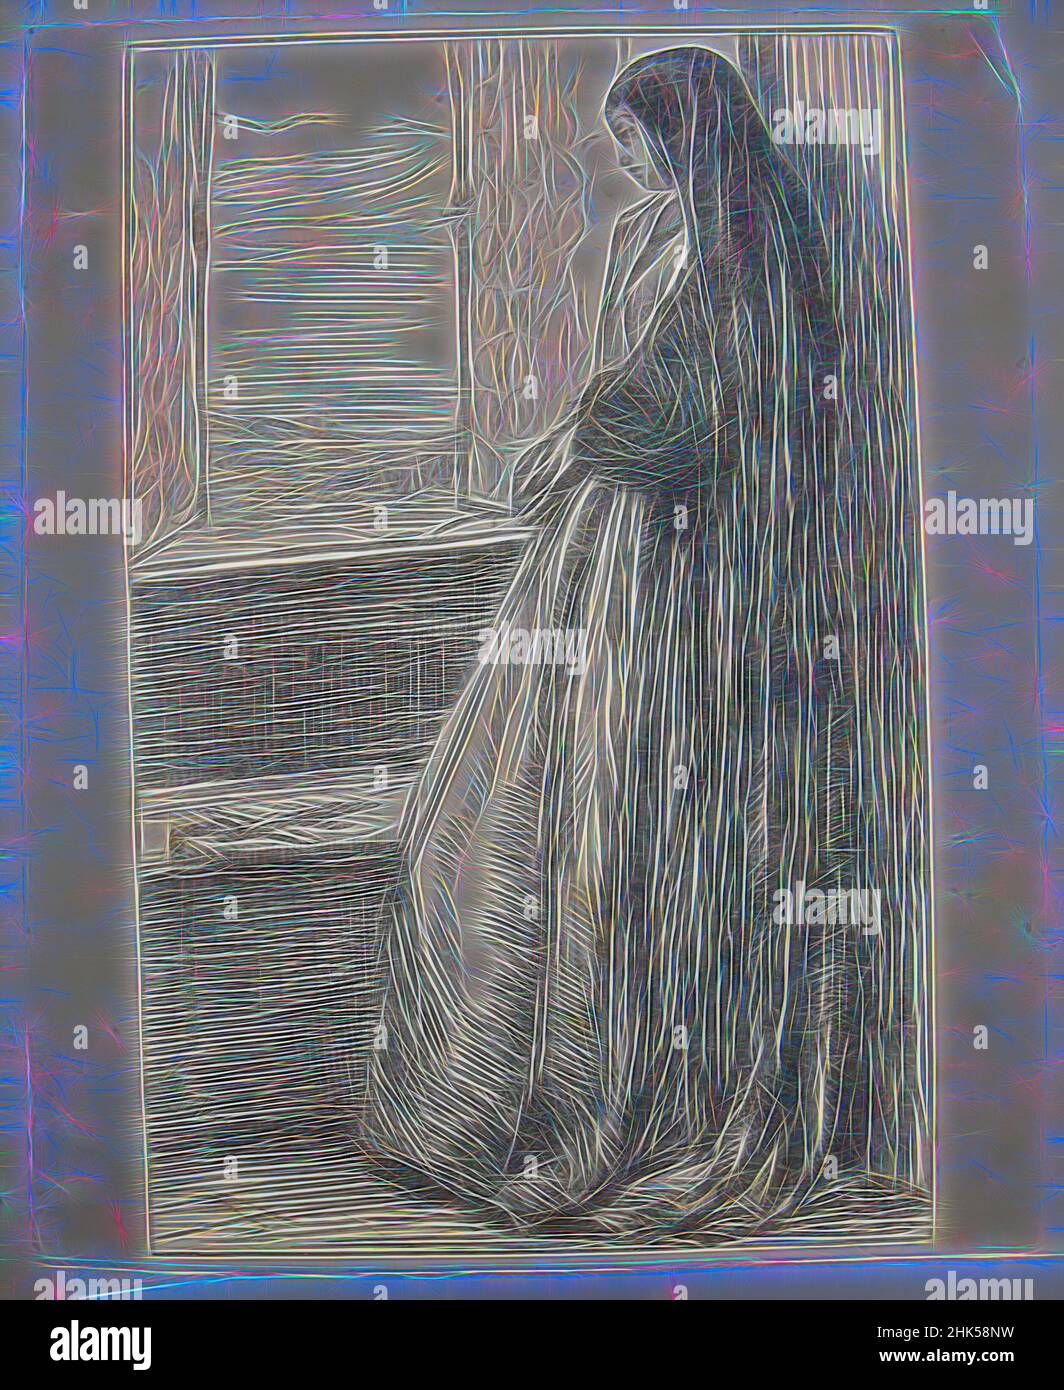 Inspired by Count Burckhardt, James Abbott McNeill Whistler, American, 1834-1903, Wood engraving on Japan paper, n.d., Sheet: 6 7/16 x 5 1/8 in., 16.4 x 13 cm, Reimagined by Artotop. Classic art reinvented with a modern twist. Design of warm cheerful glowing of brightness and light ray radiance. Photography inspired by surrealism and futurism, embracing dynamic energy of modern technology, movement, speed and revolutionize culture Stock Photo